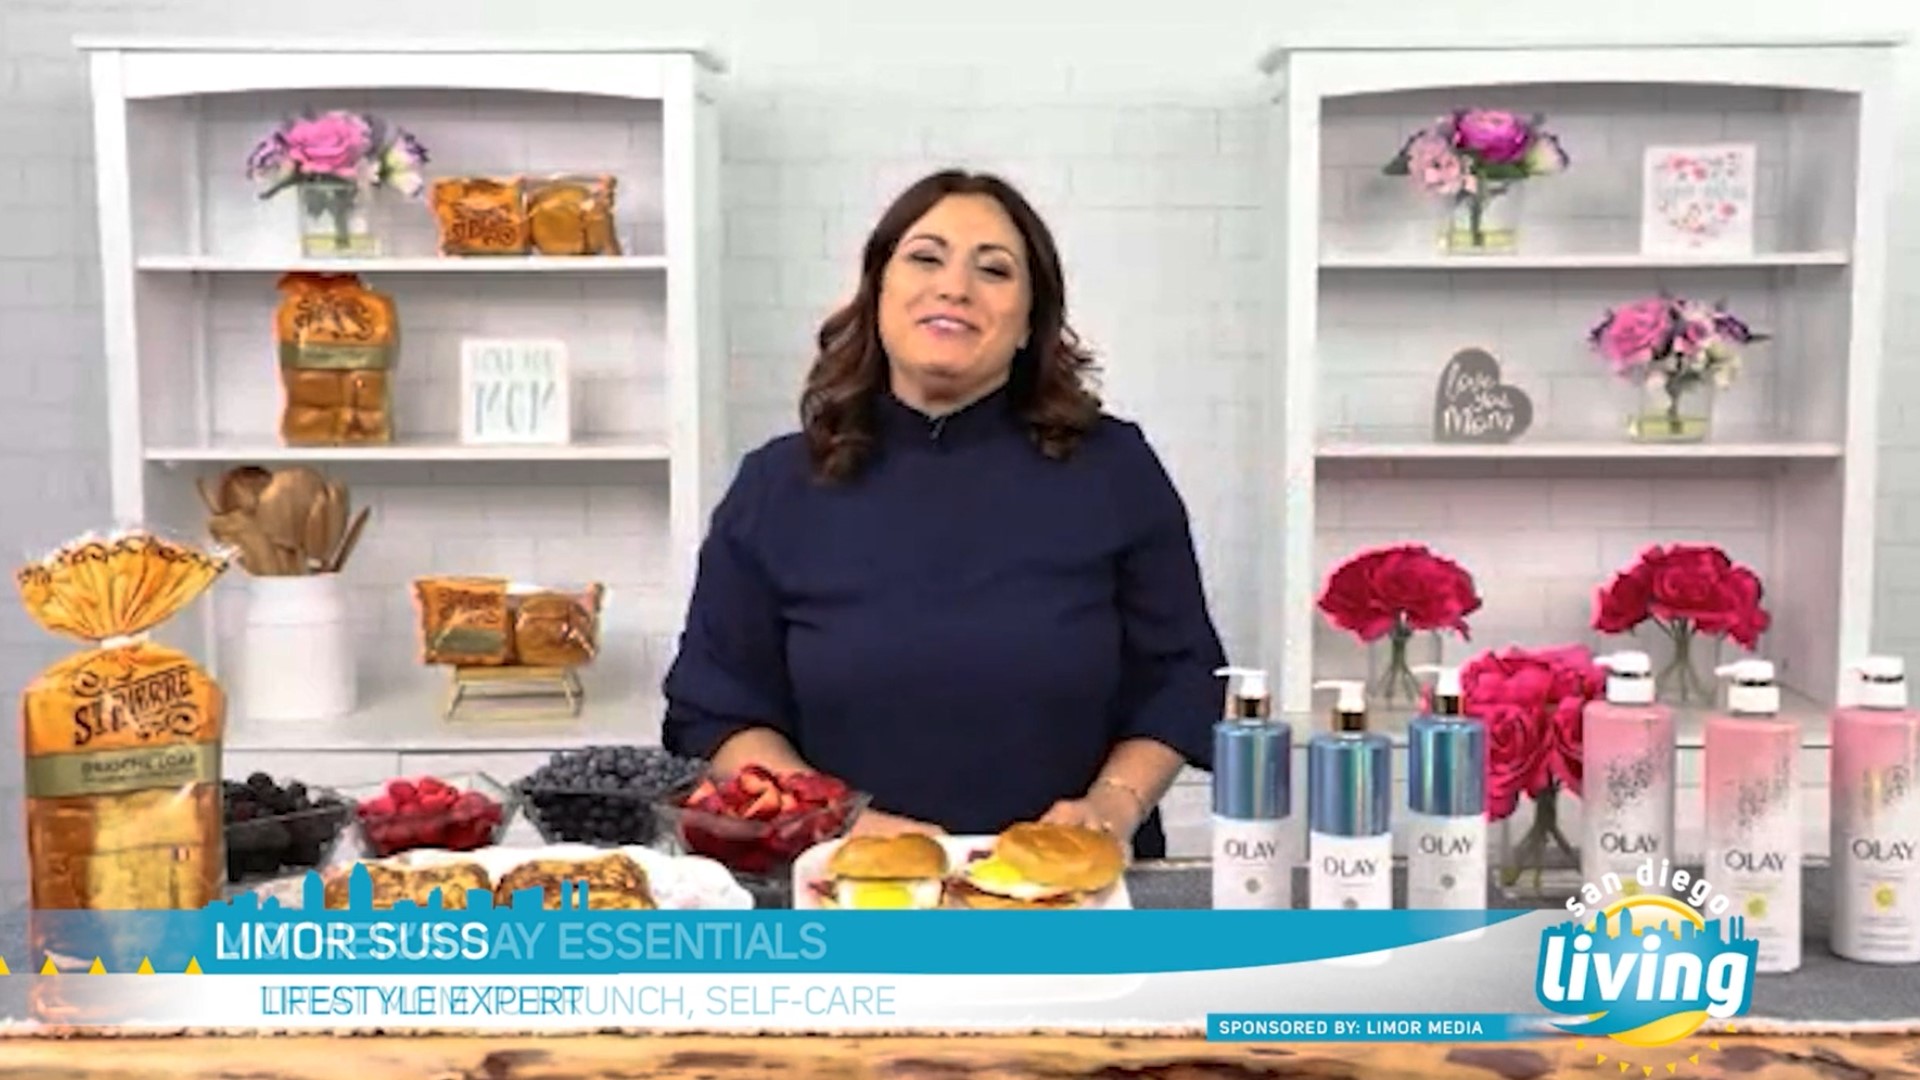 Brunch and Self-Care Gift Ideas Mom will Love. Sponsored by Limor Media.